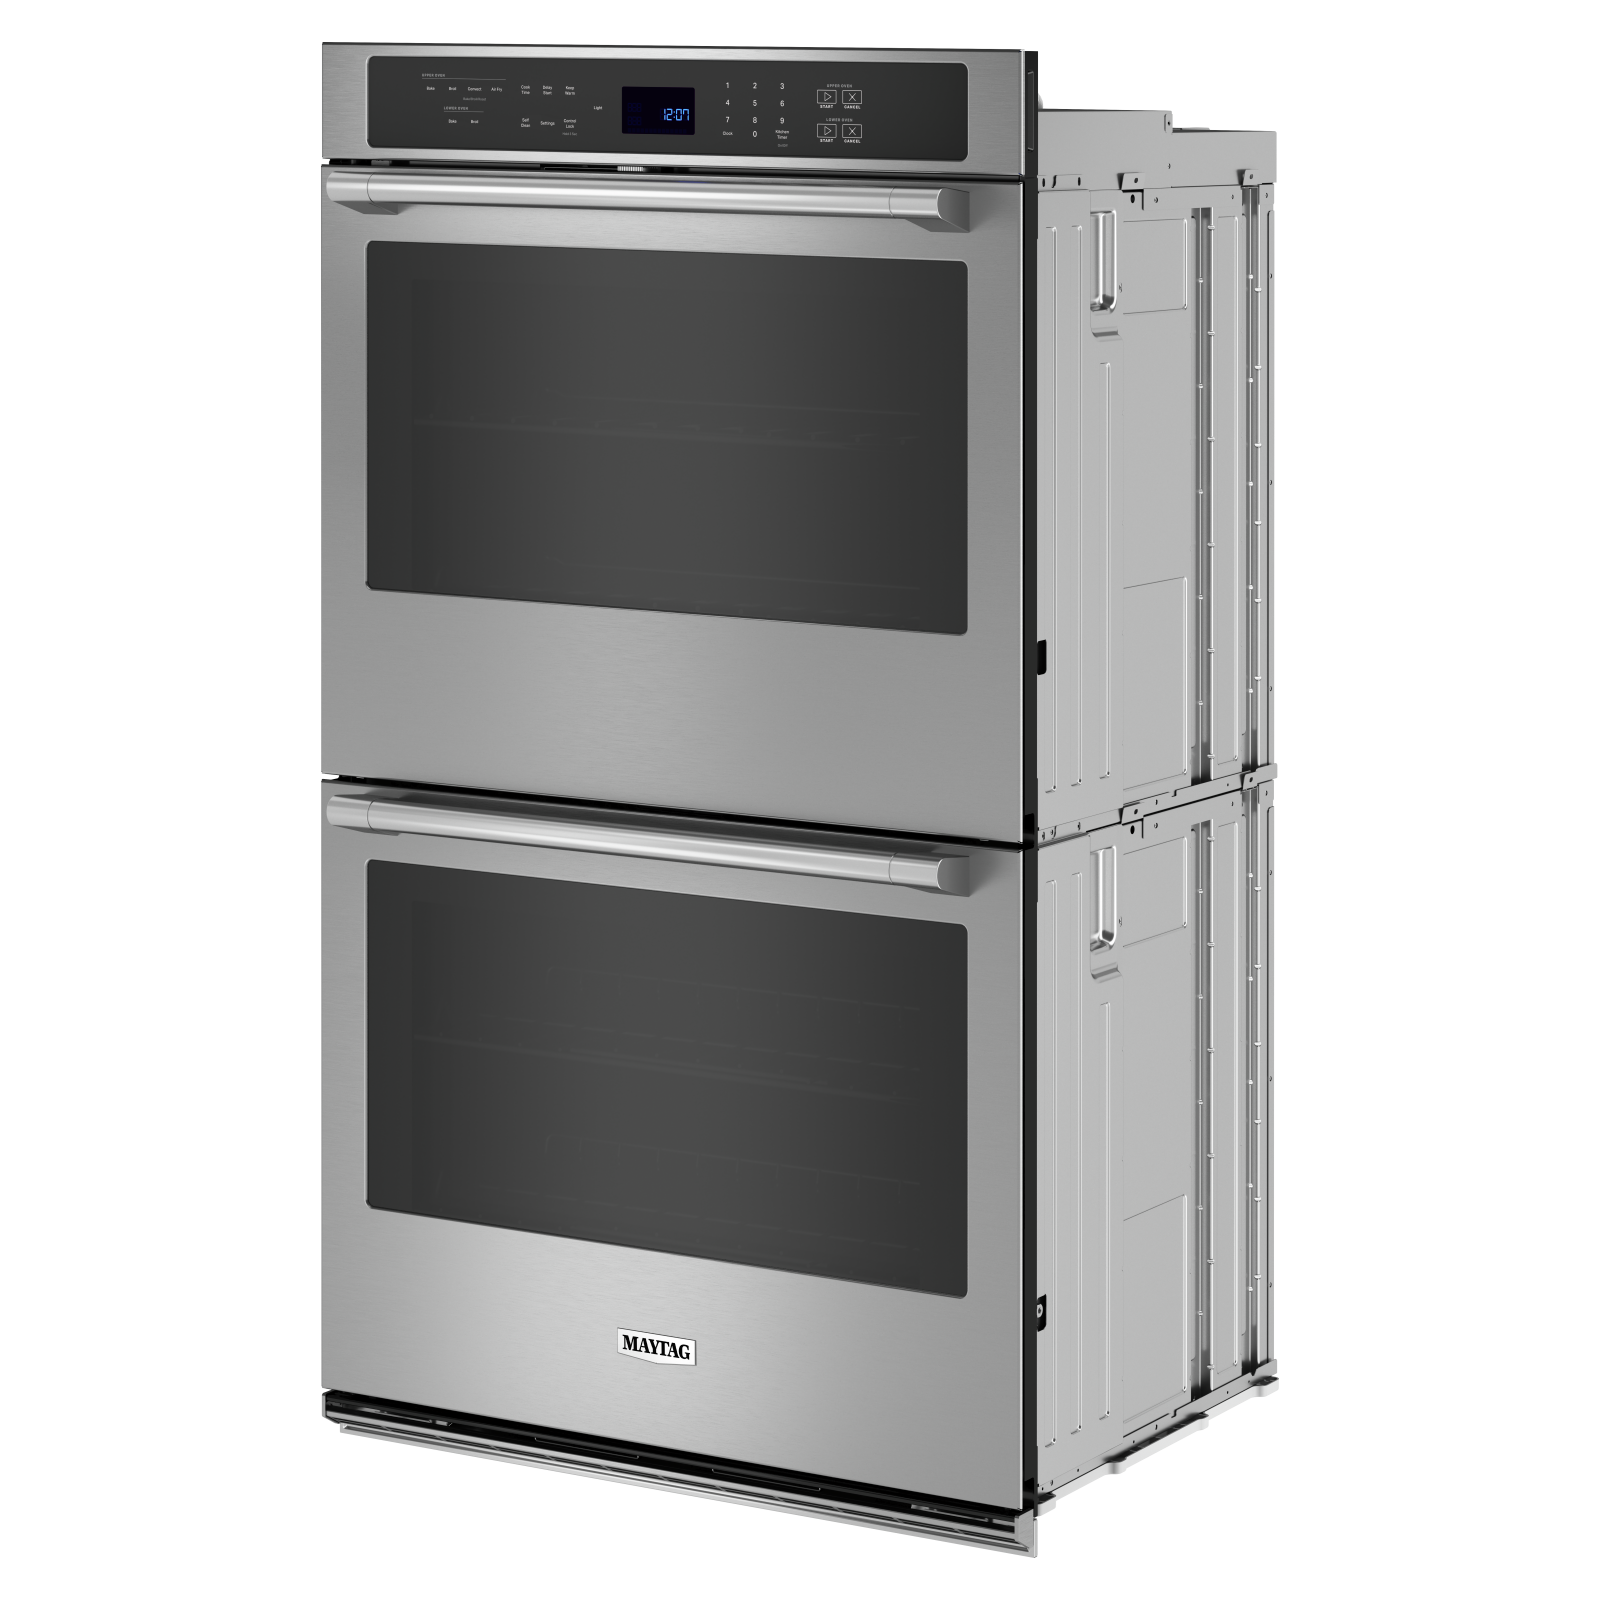 Maytag - 8.6 cu. ft Double Wall Oven in Stainless - MOED6027LZ